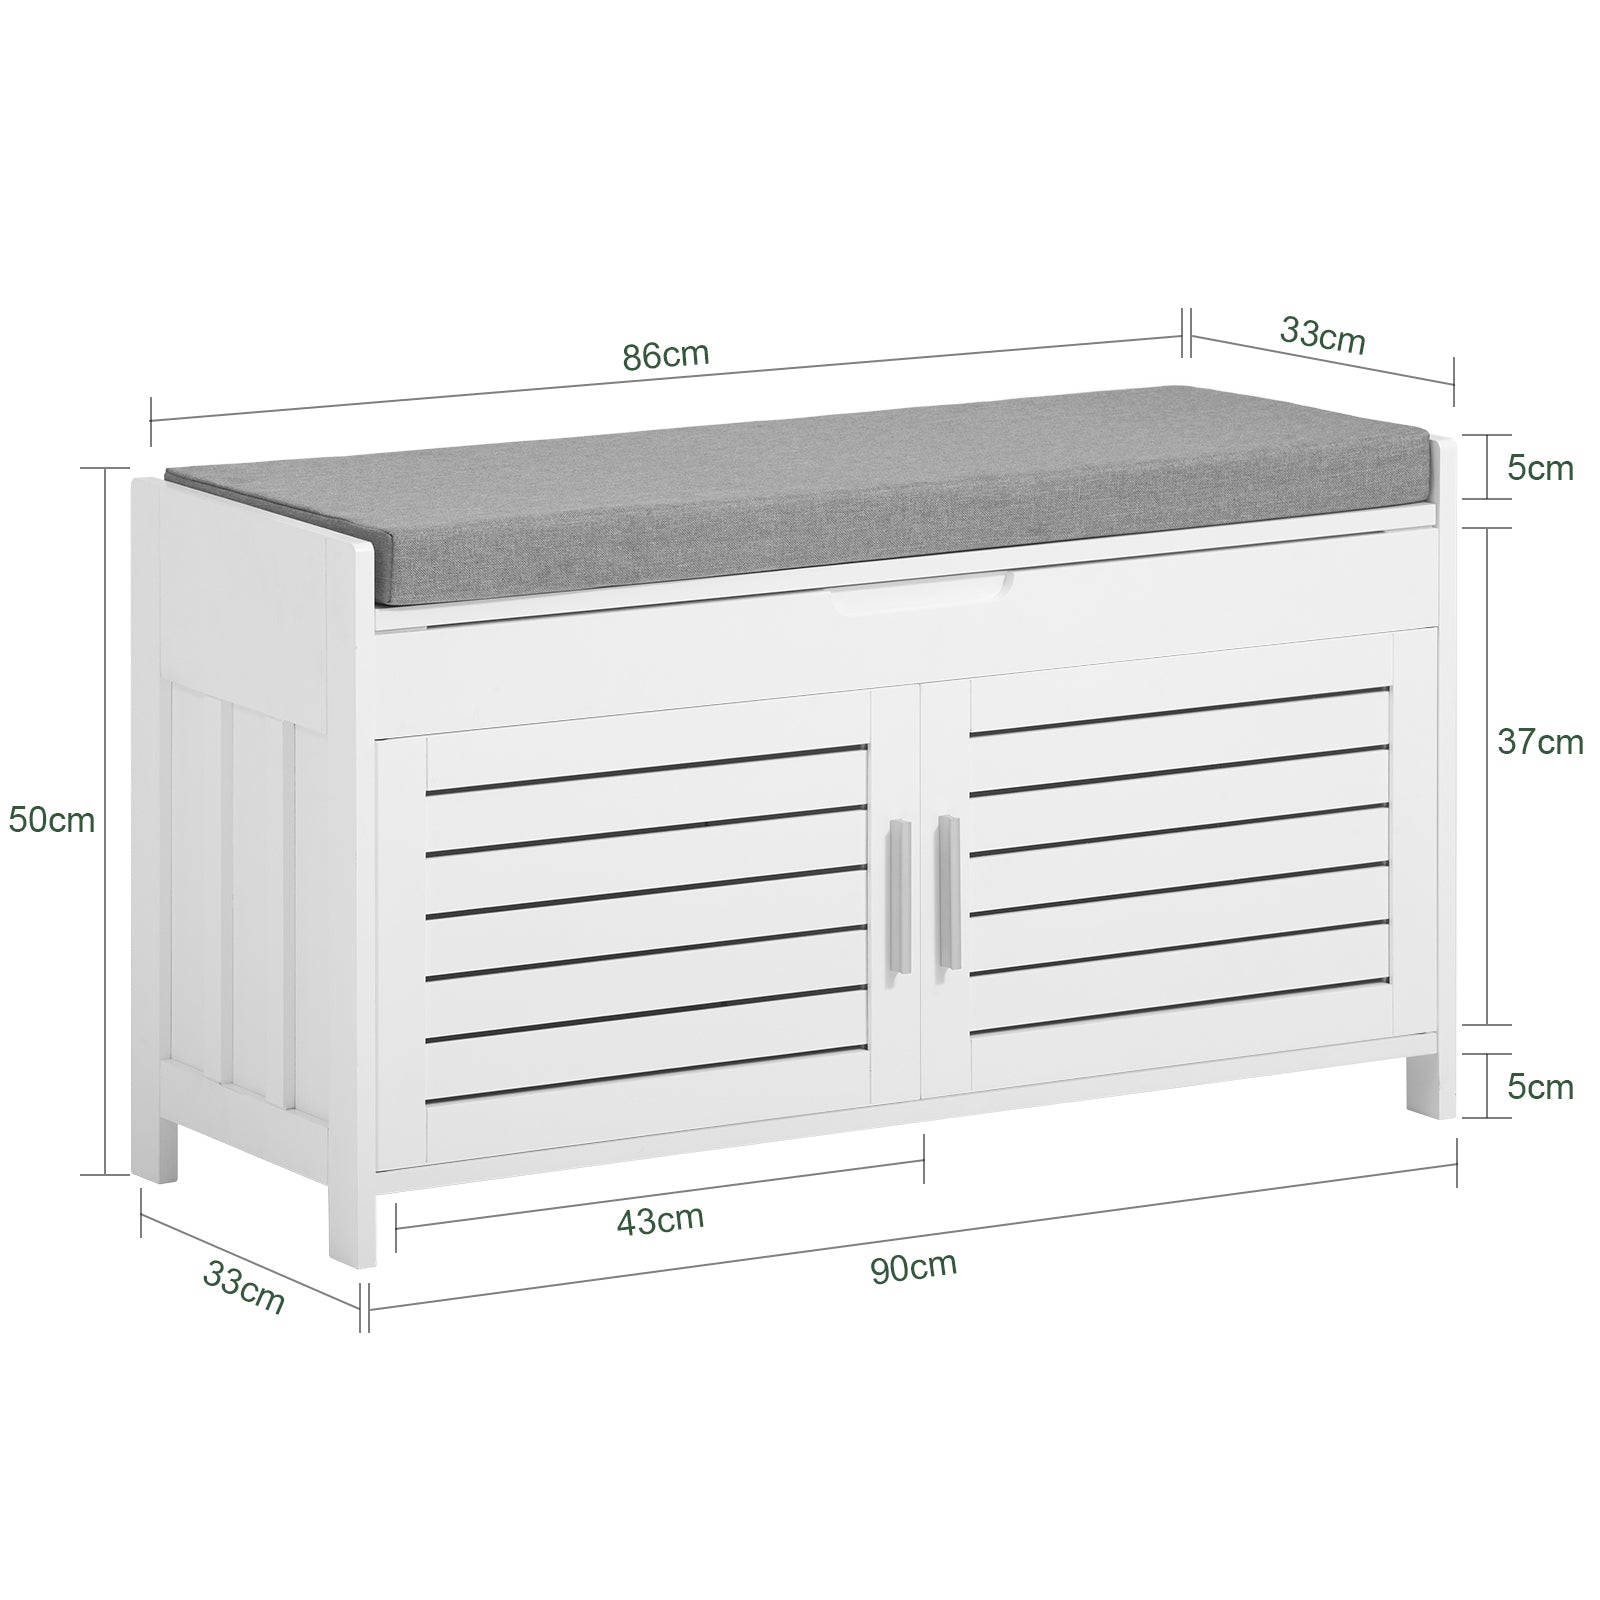 SoBuy FSR102-W, Shoe Bench Storage Cabinet with Foldable Padded Seat and 2 Doors